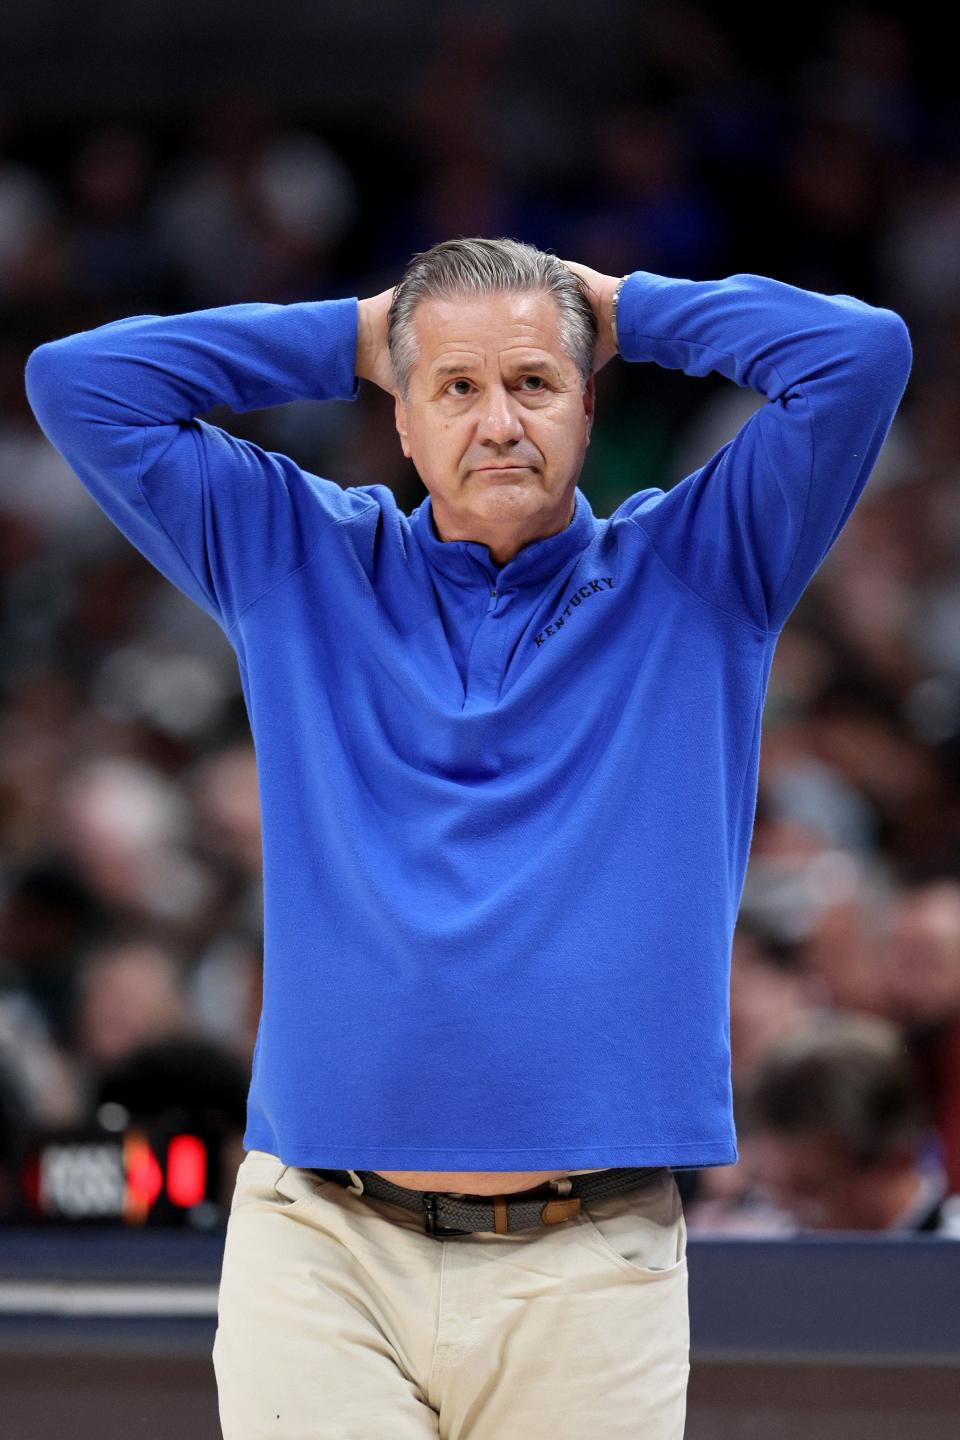 Head coach John Calipari of the Kentucky Wildcats reacts after a play during the second half during the Champions Classic at Gainbridge Fieldhouse on November 15, 2022 in Indianapolis, Indiana.